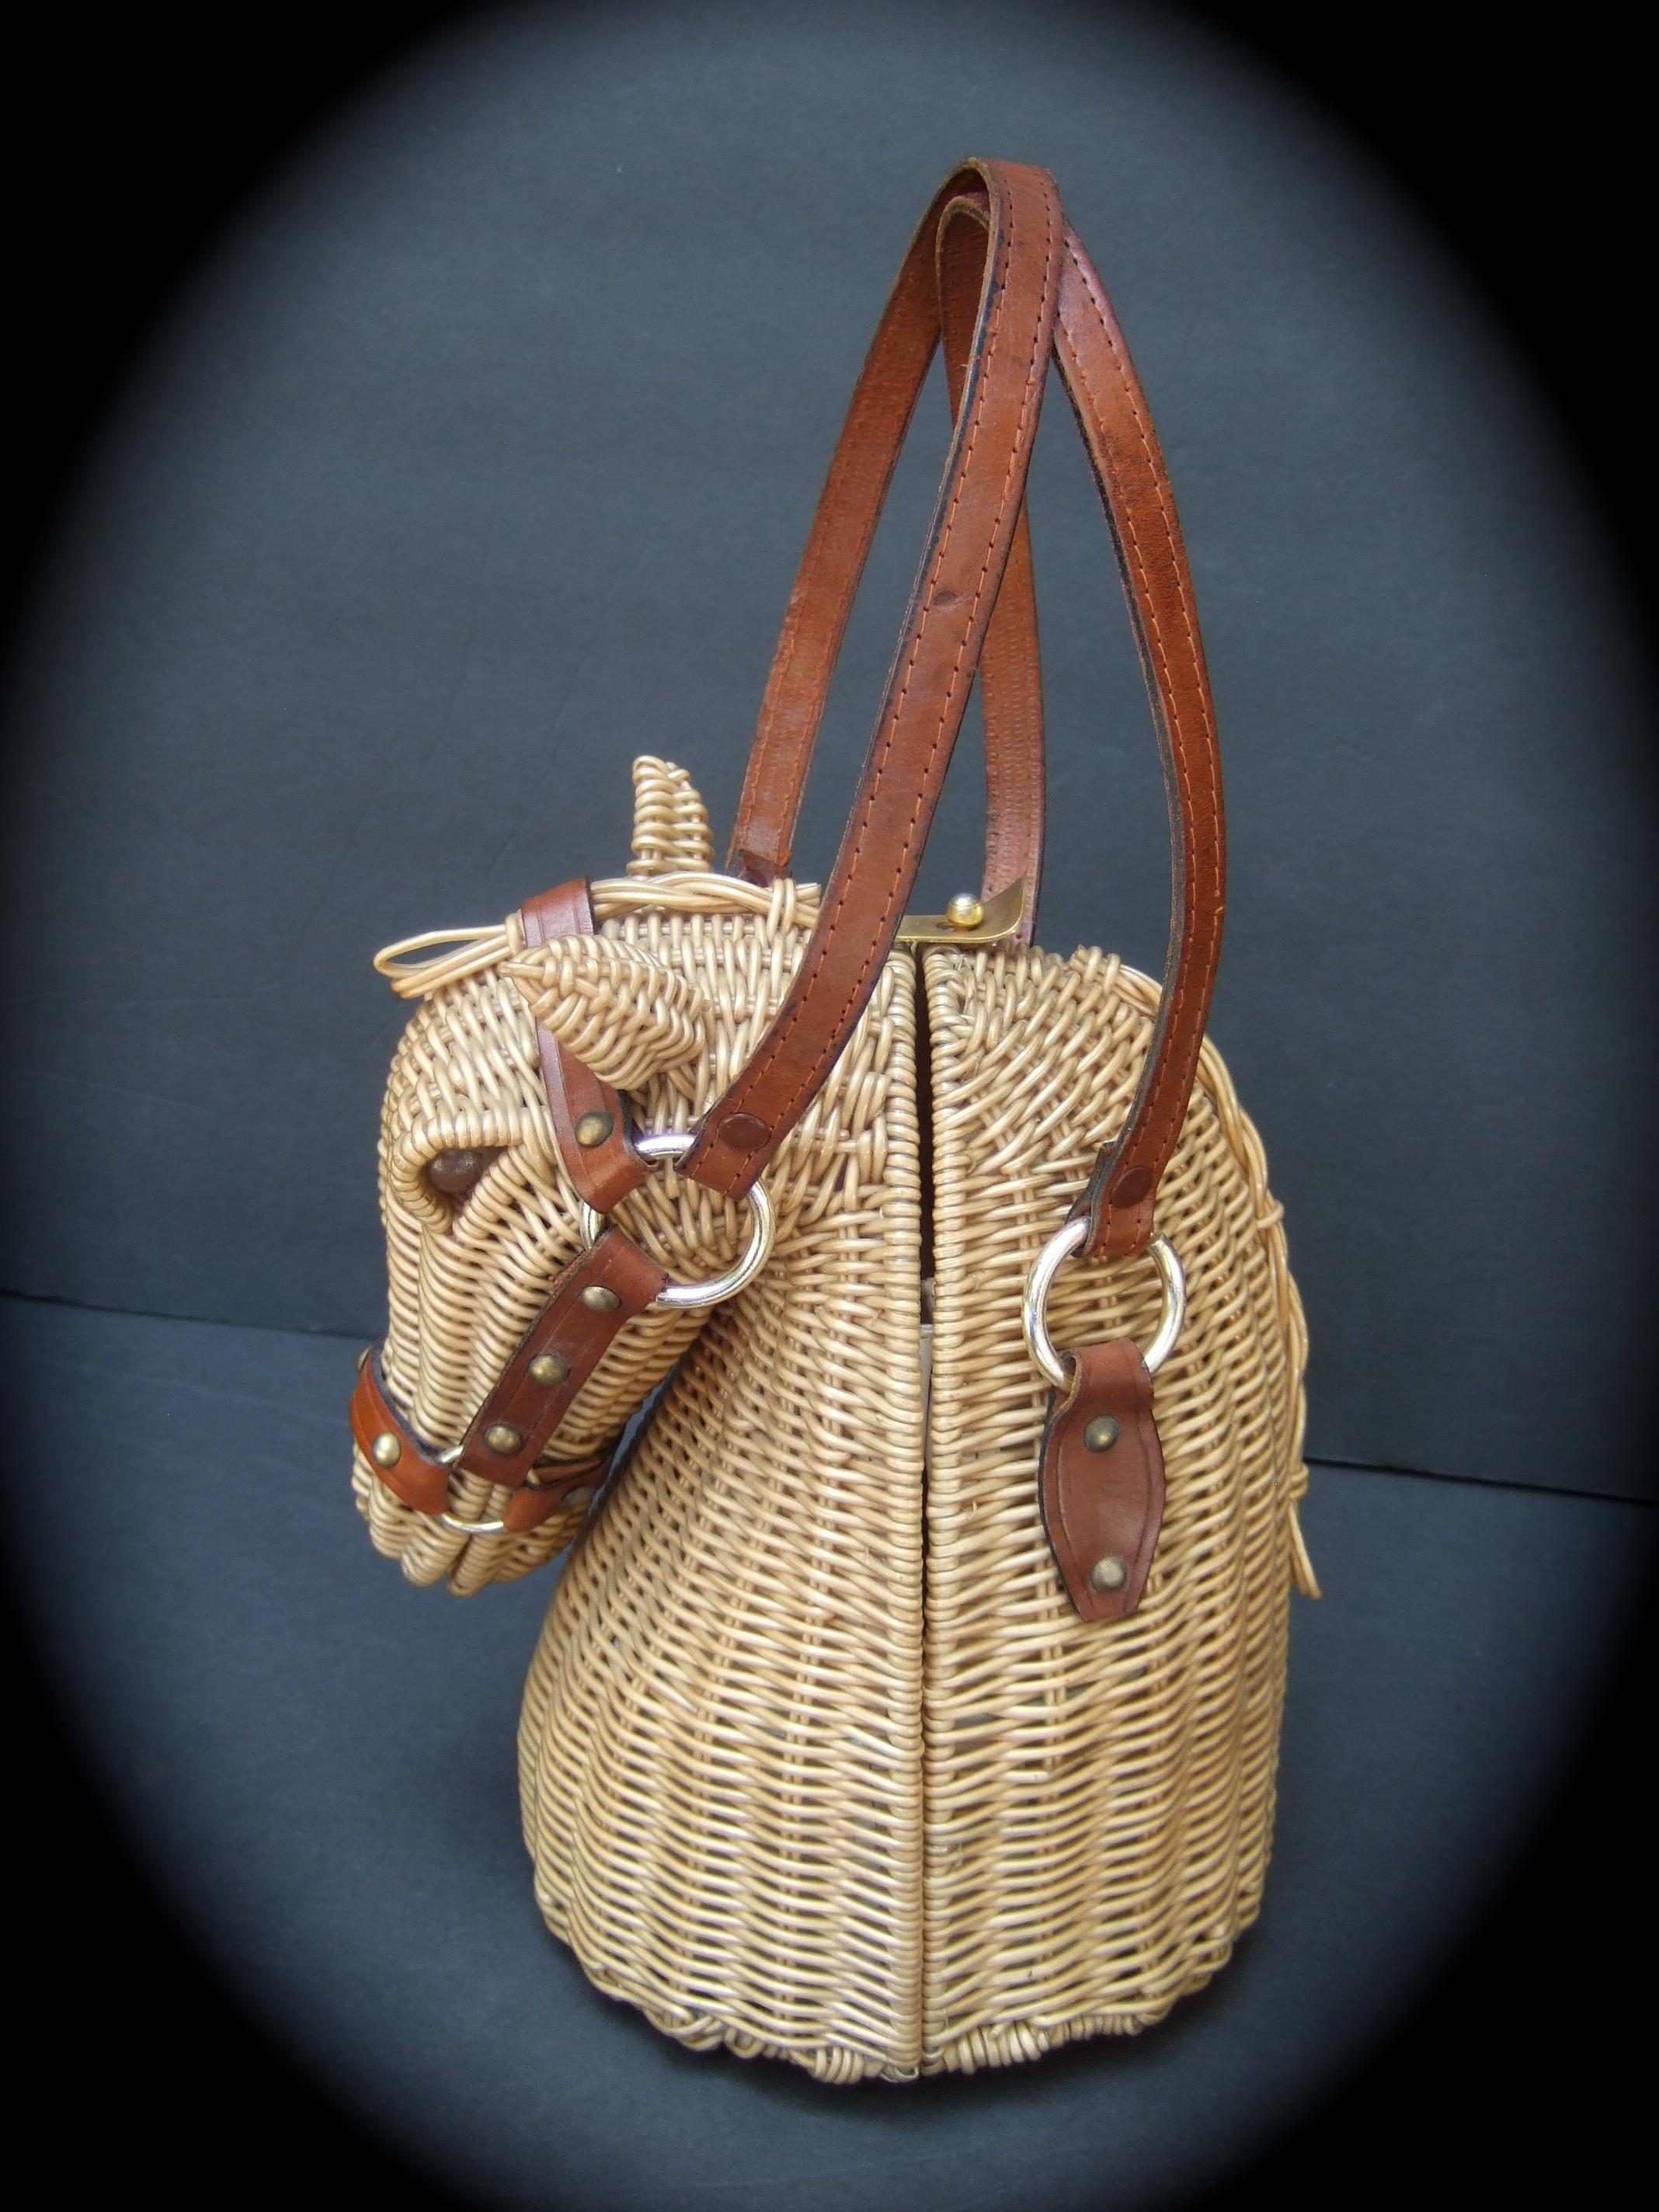 Extremely Rare Wicker Rattan Equine Handbag Designed by Marcus Brothers c 1970 2